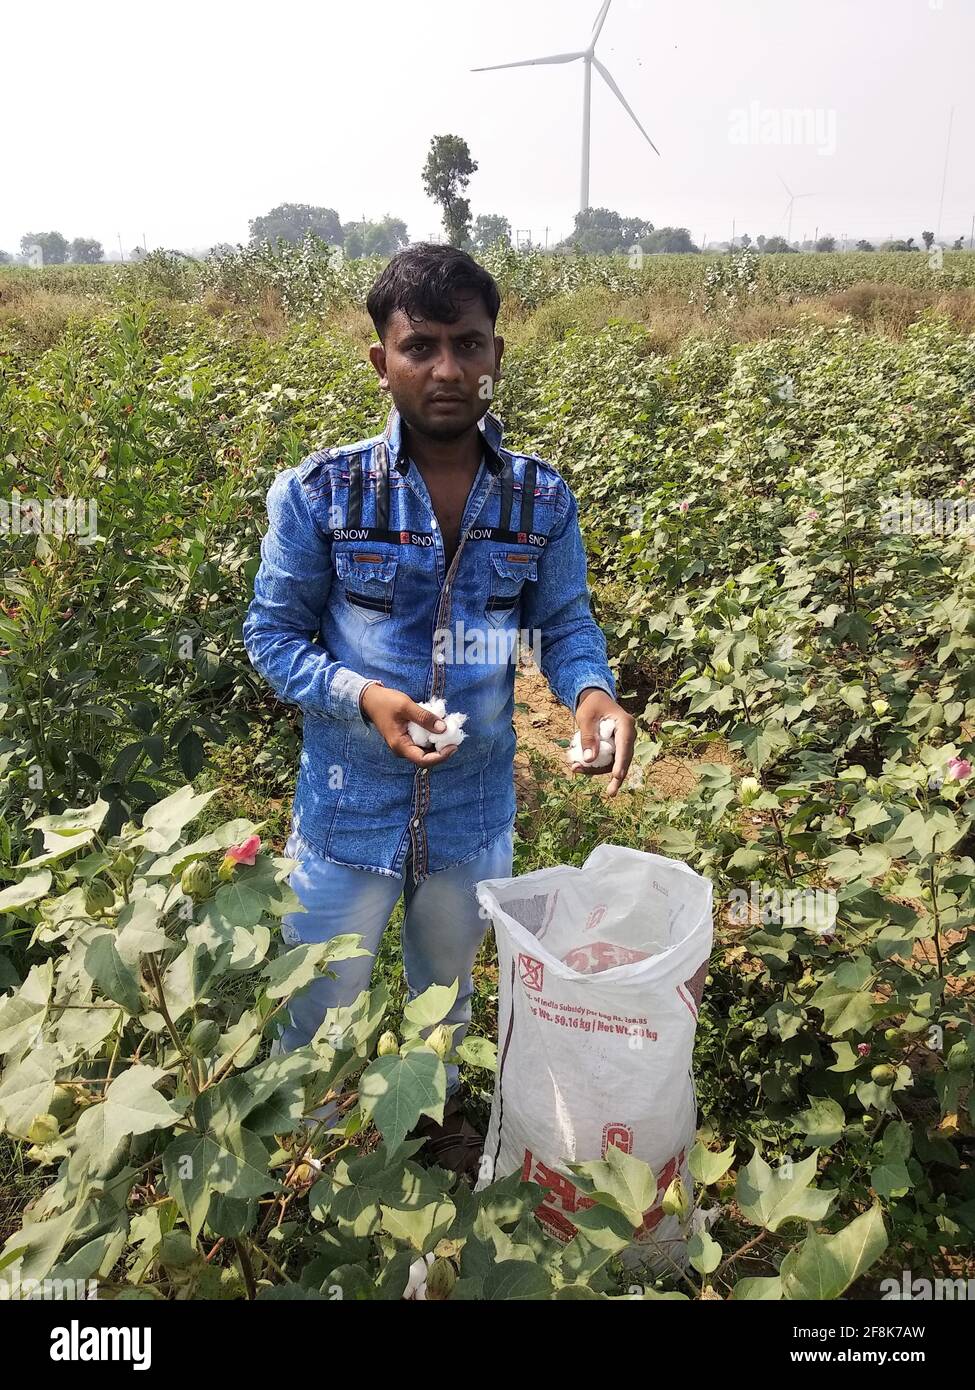 RAJKOT, INDIA - Nov 18, 2019: 18- november- 2019,gadhala, gujrat, india:- An Indian young man plucks cotton from a cotton plant planted in a field Stock Photo